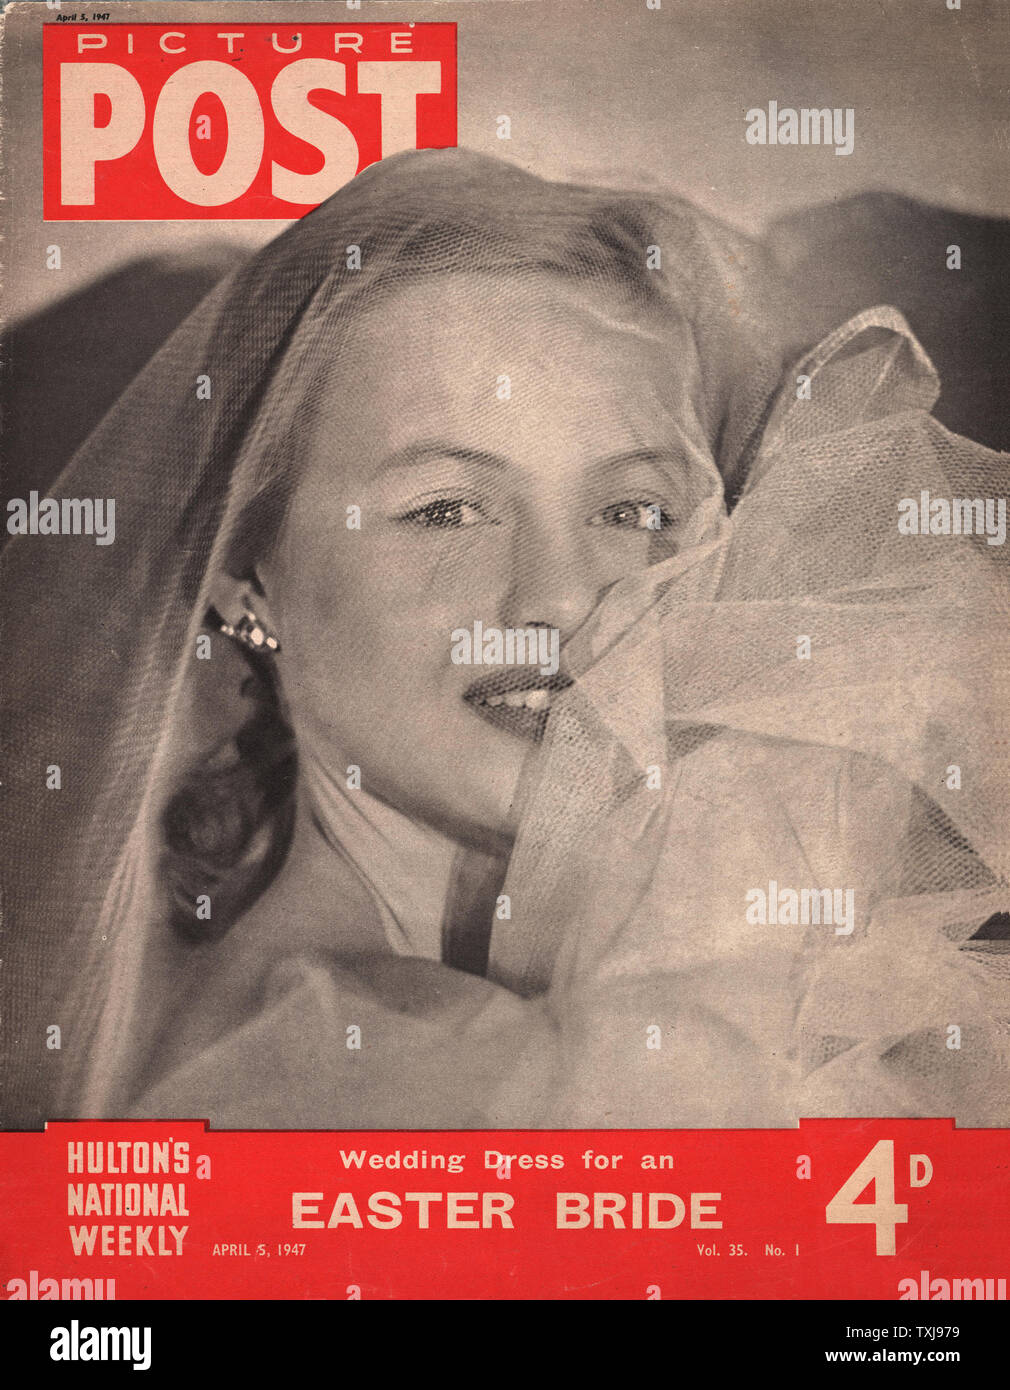 1947 Picture Post magazine front page showing lady in a wedding dress Stock Photo